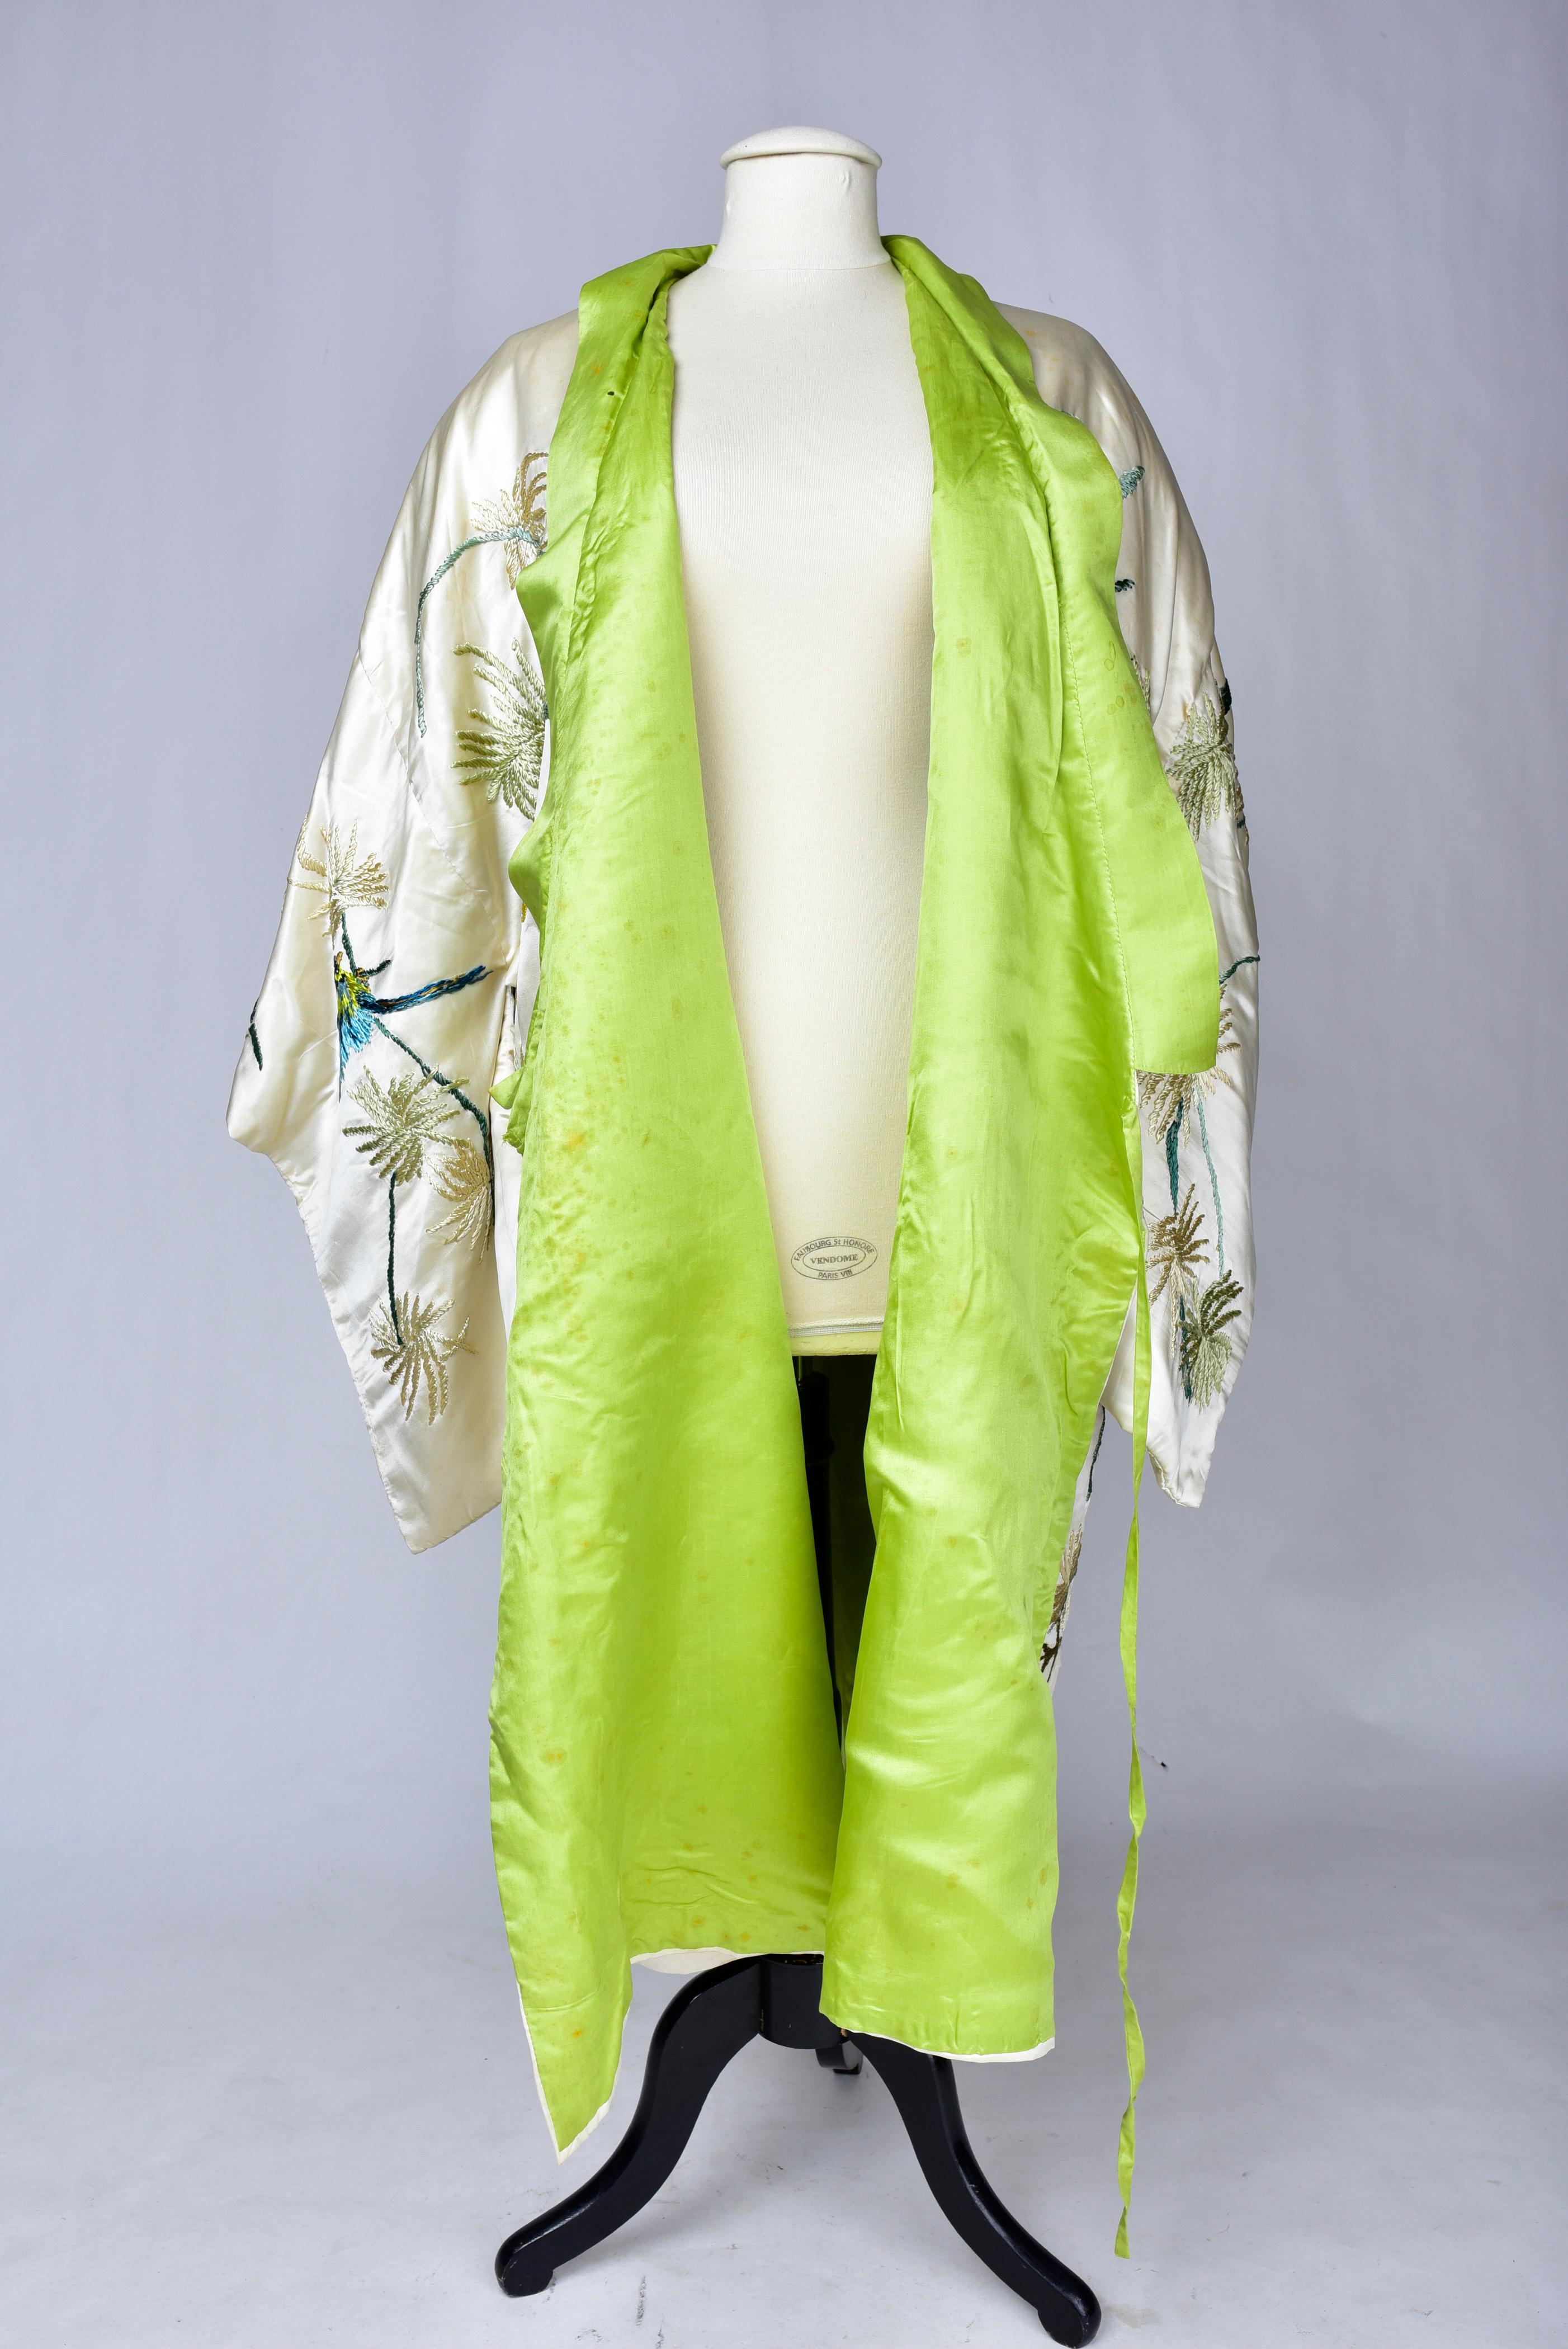 A Satin Embroidered Evening Kimono with palm trees and parrots France Circa 1930 For Sale 4